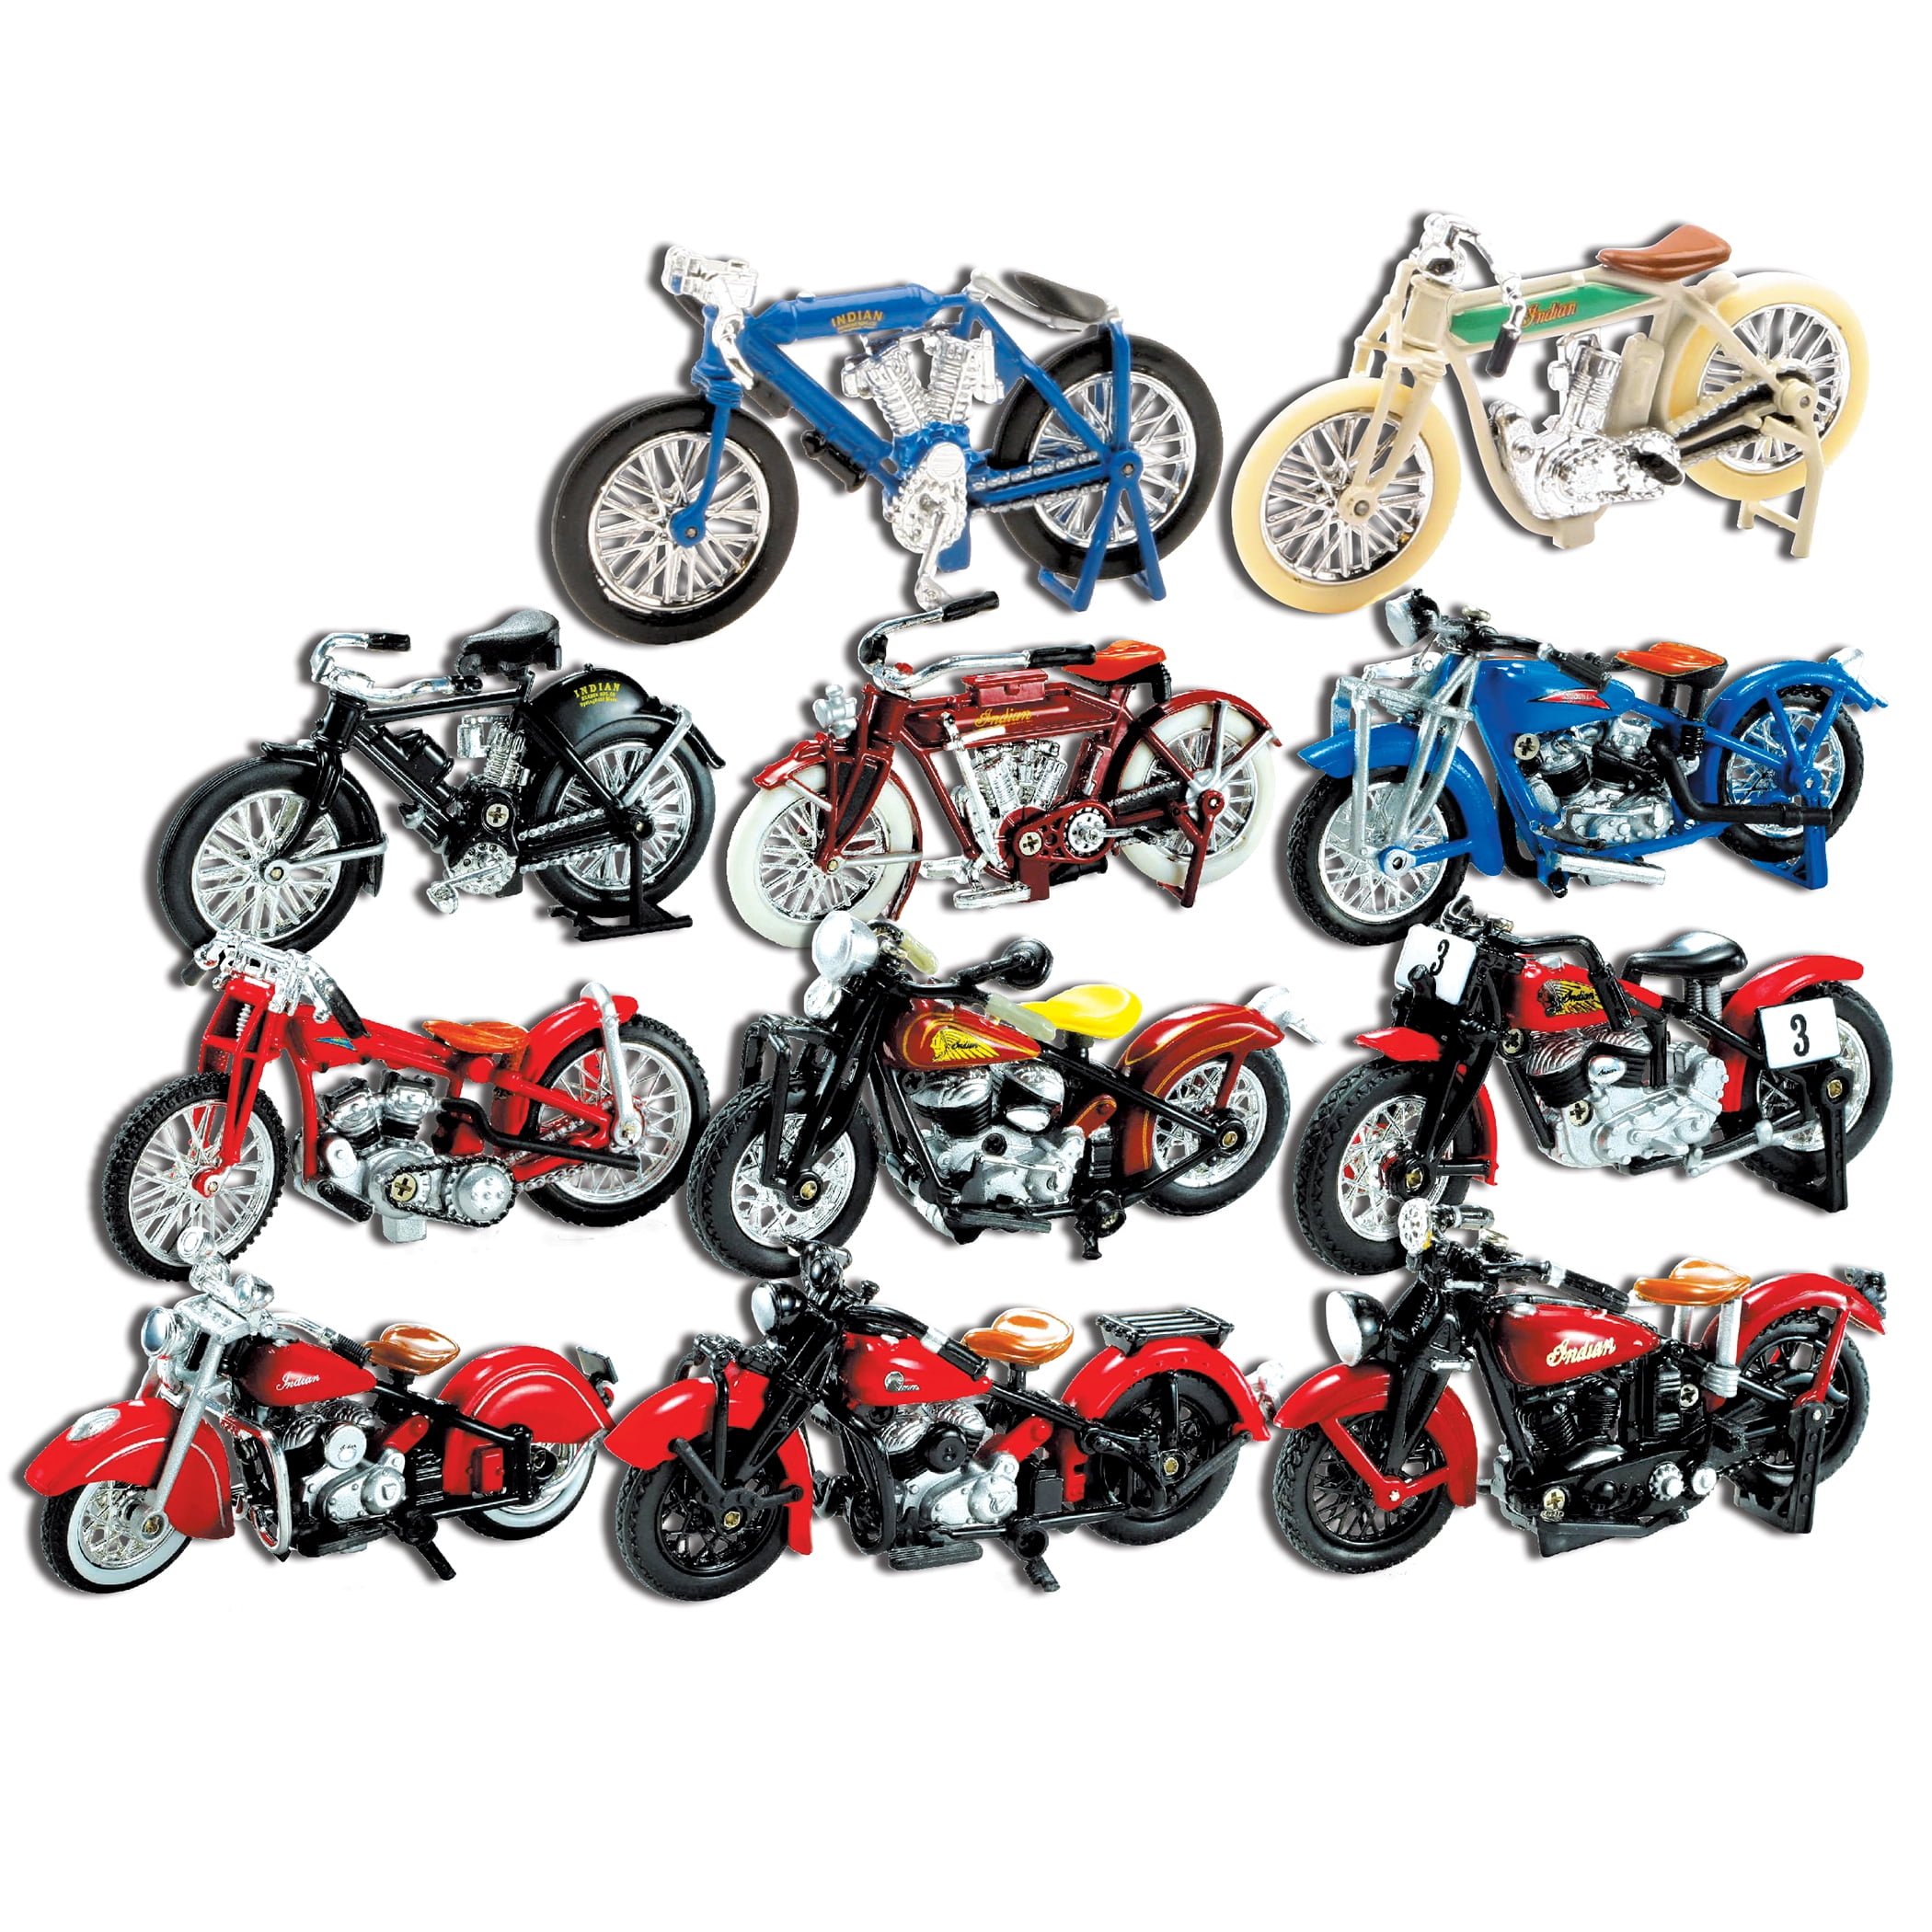 Newray 2.5" DIECAST Mini Novelty Motorcycle Model COLLECTION Limited Edition Ne